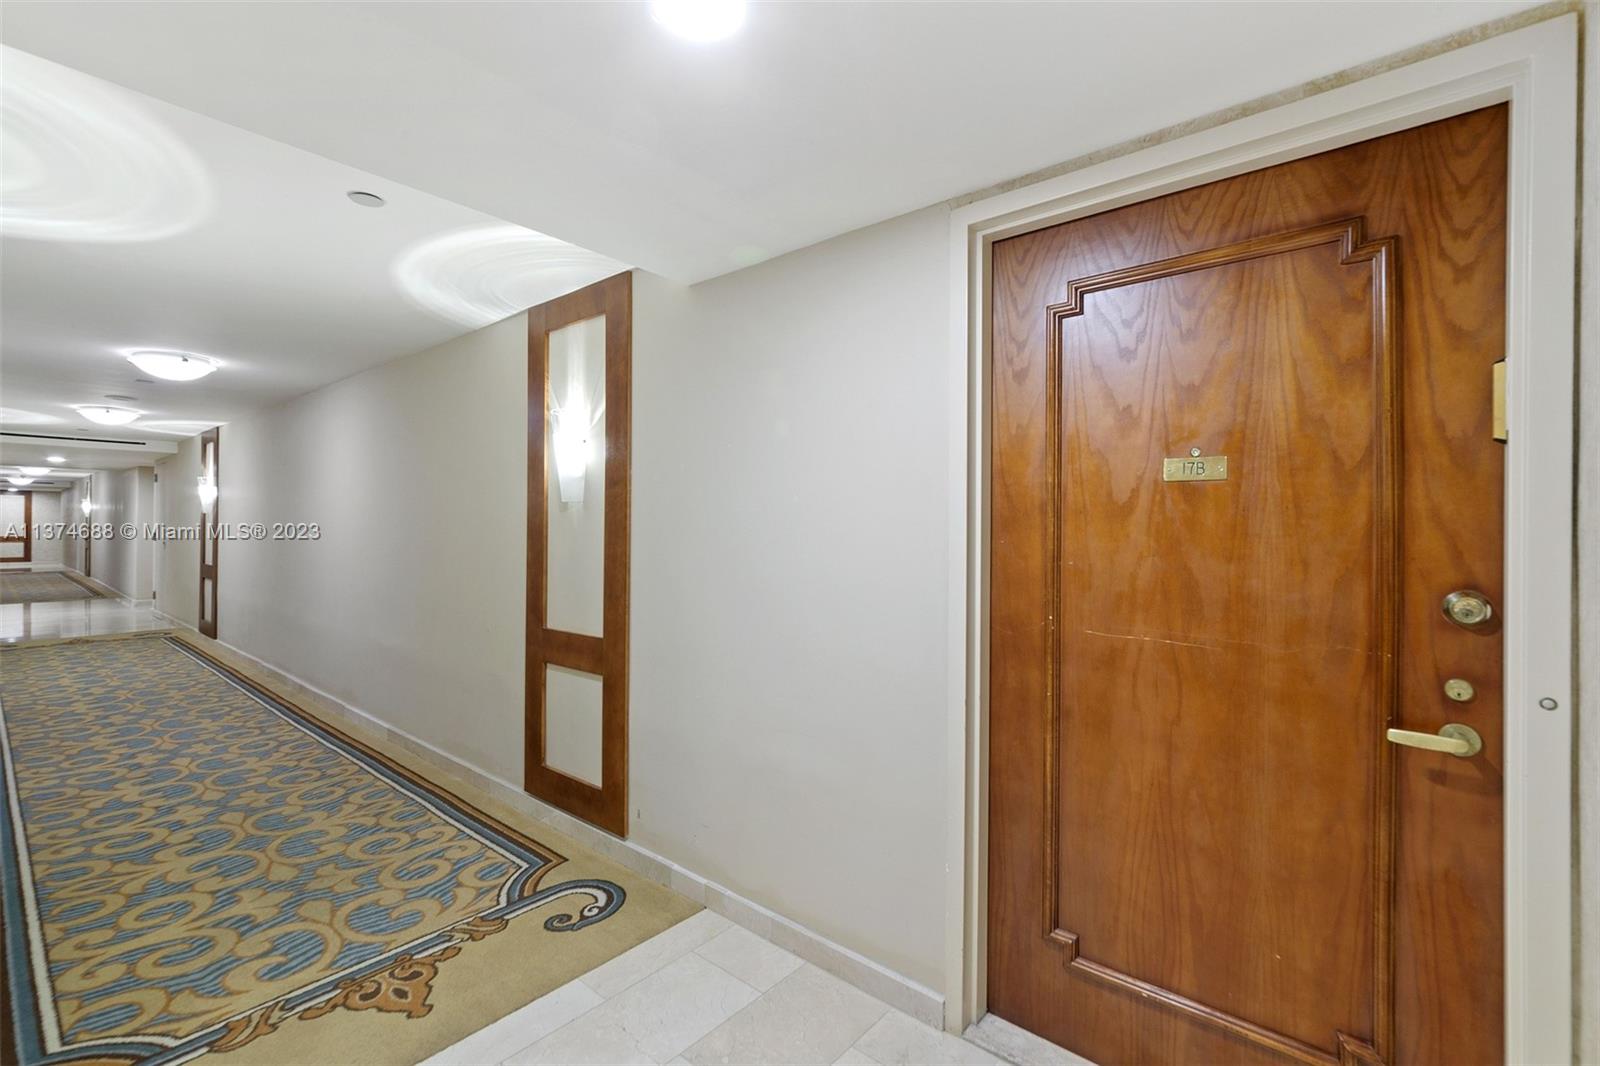 Photo 32 of Turnberry Towers Condo Apt 17B in Aventura - MLS A11374688